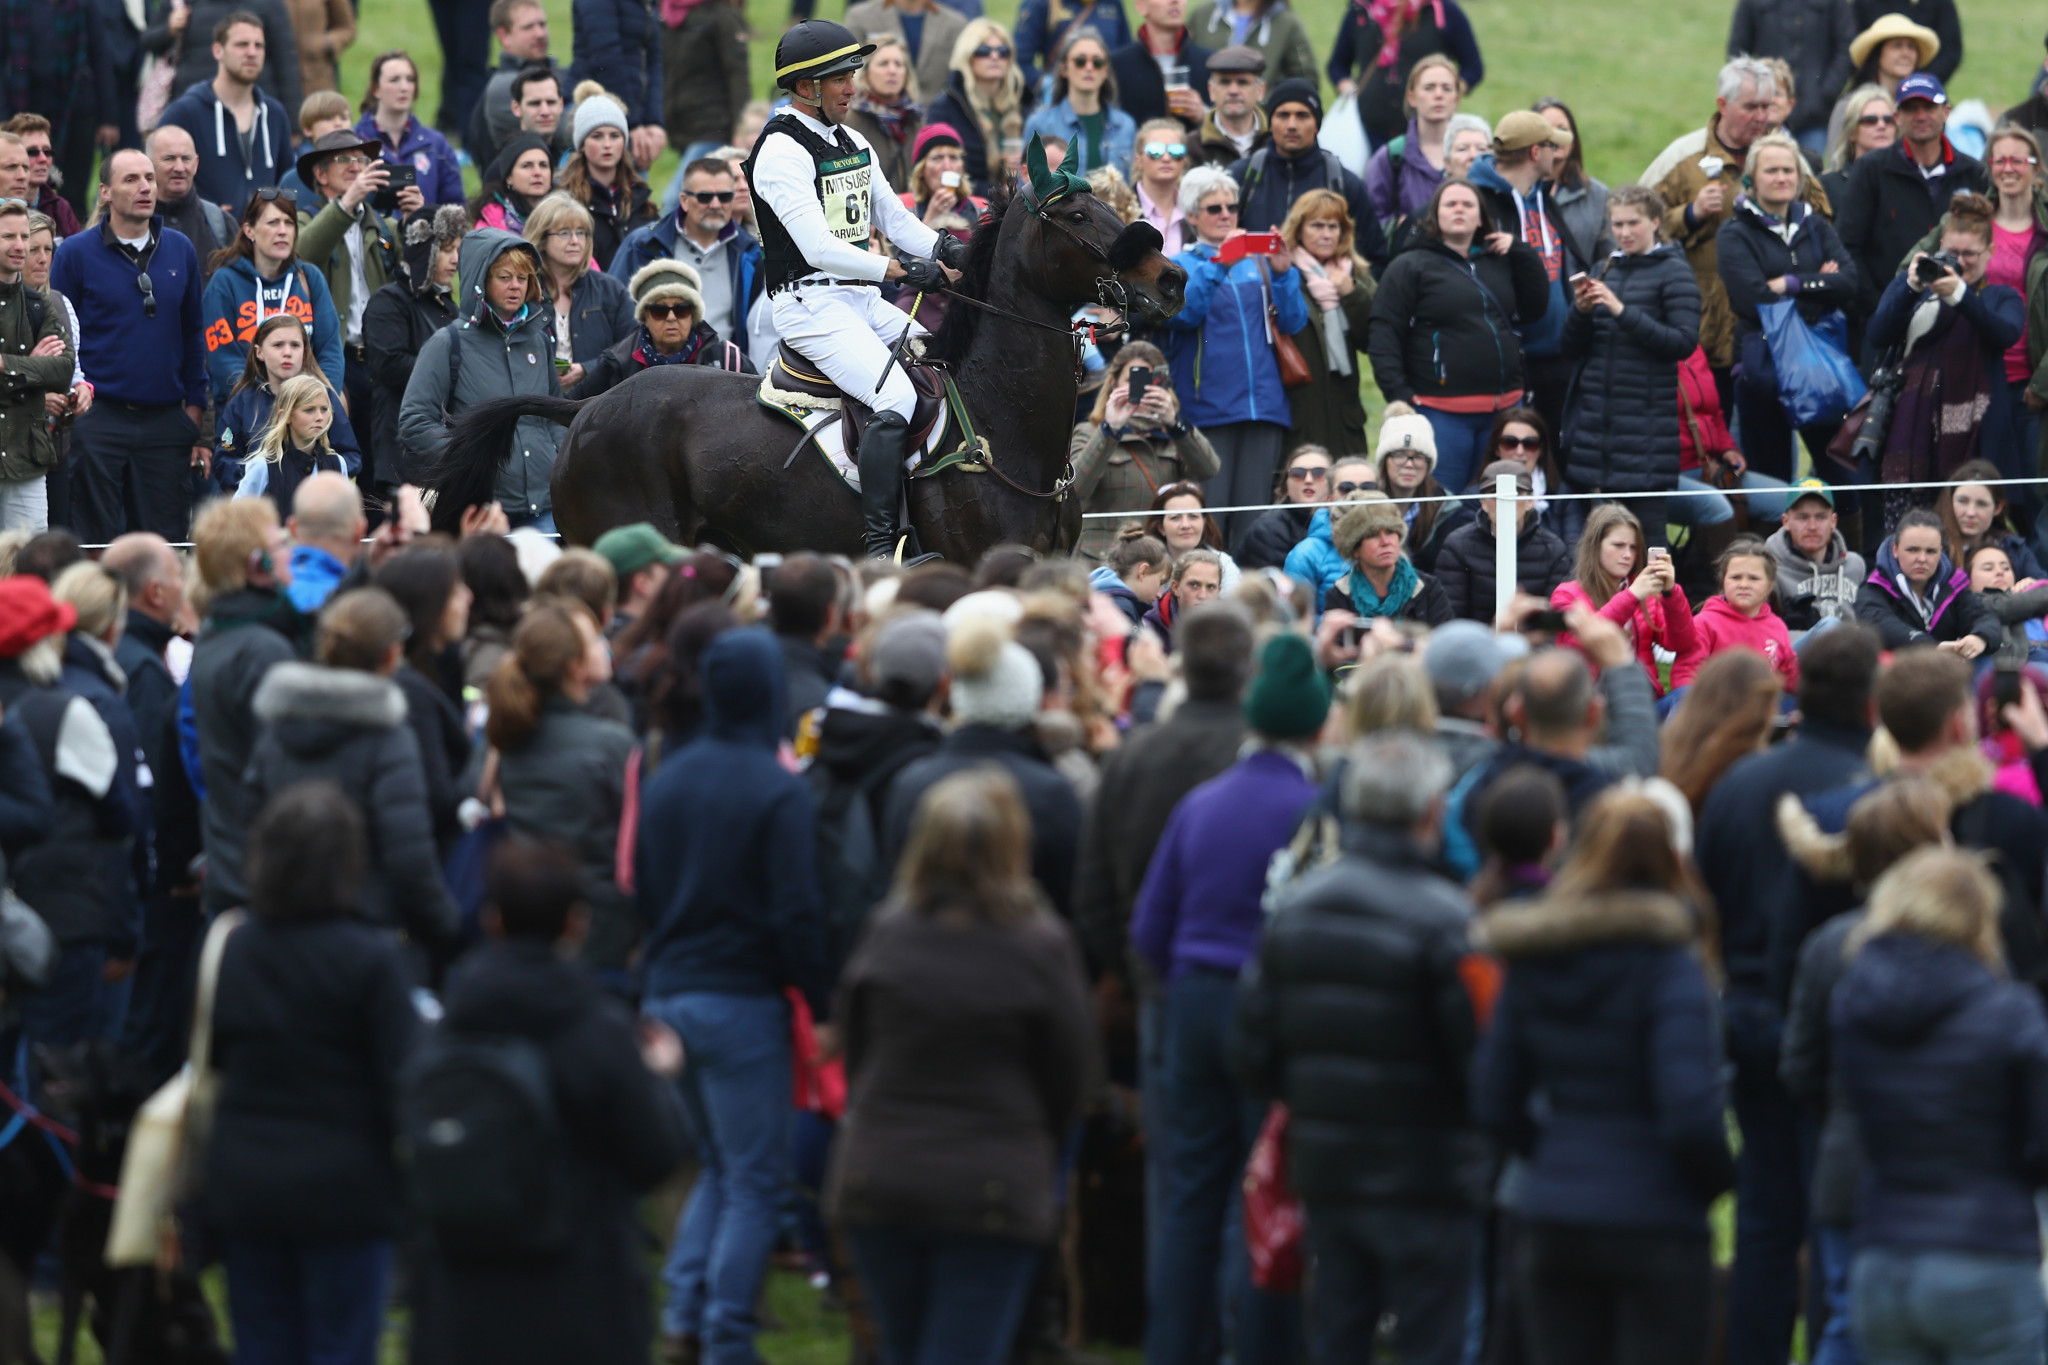 Badminton Horse Trials cancelled for second successive year due to "fragile and unpredictable" coronavirus situation